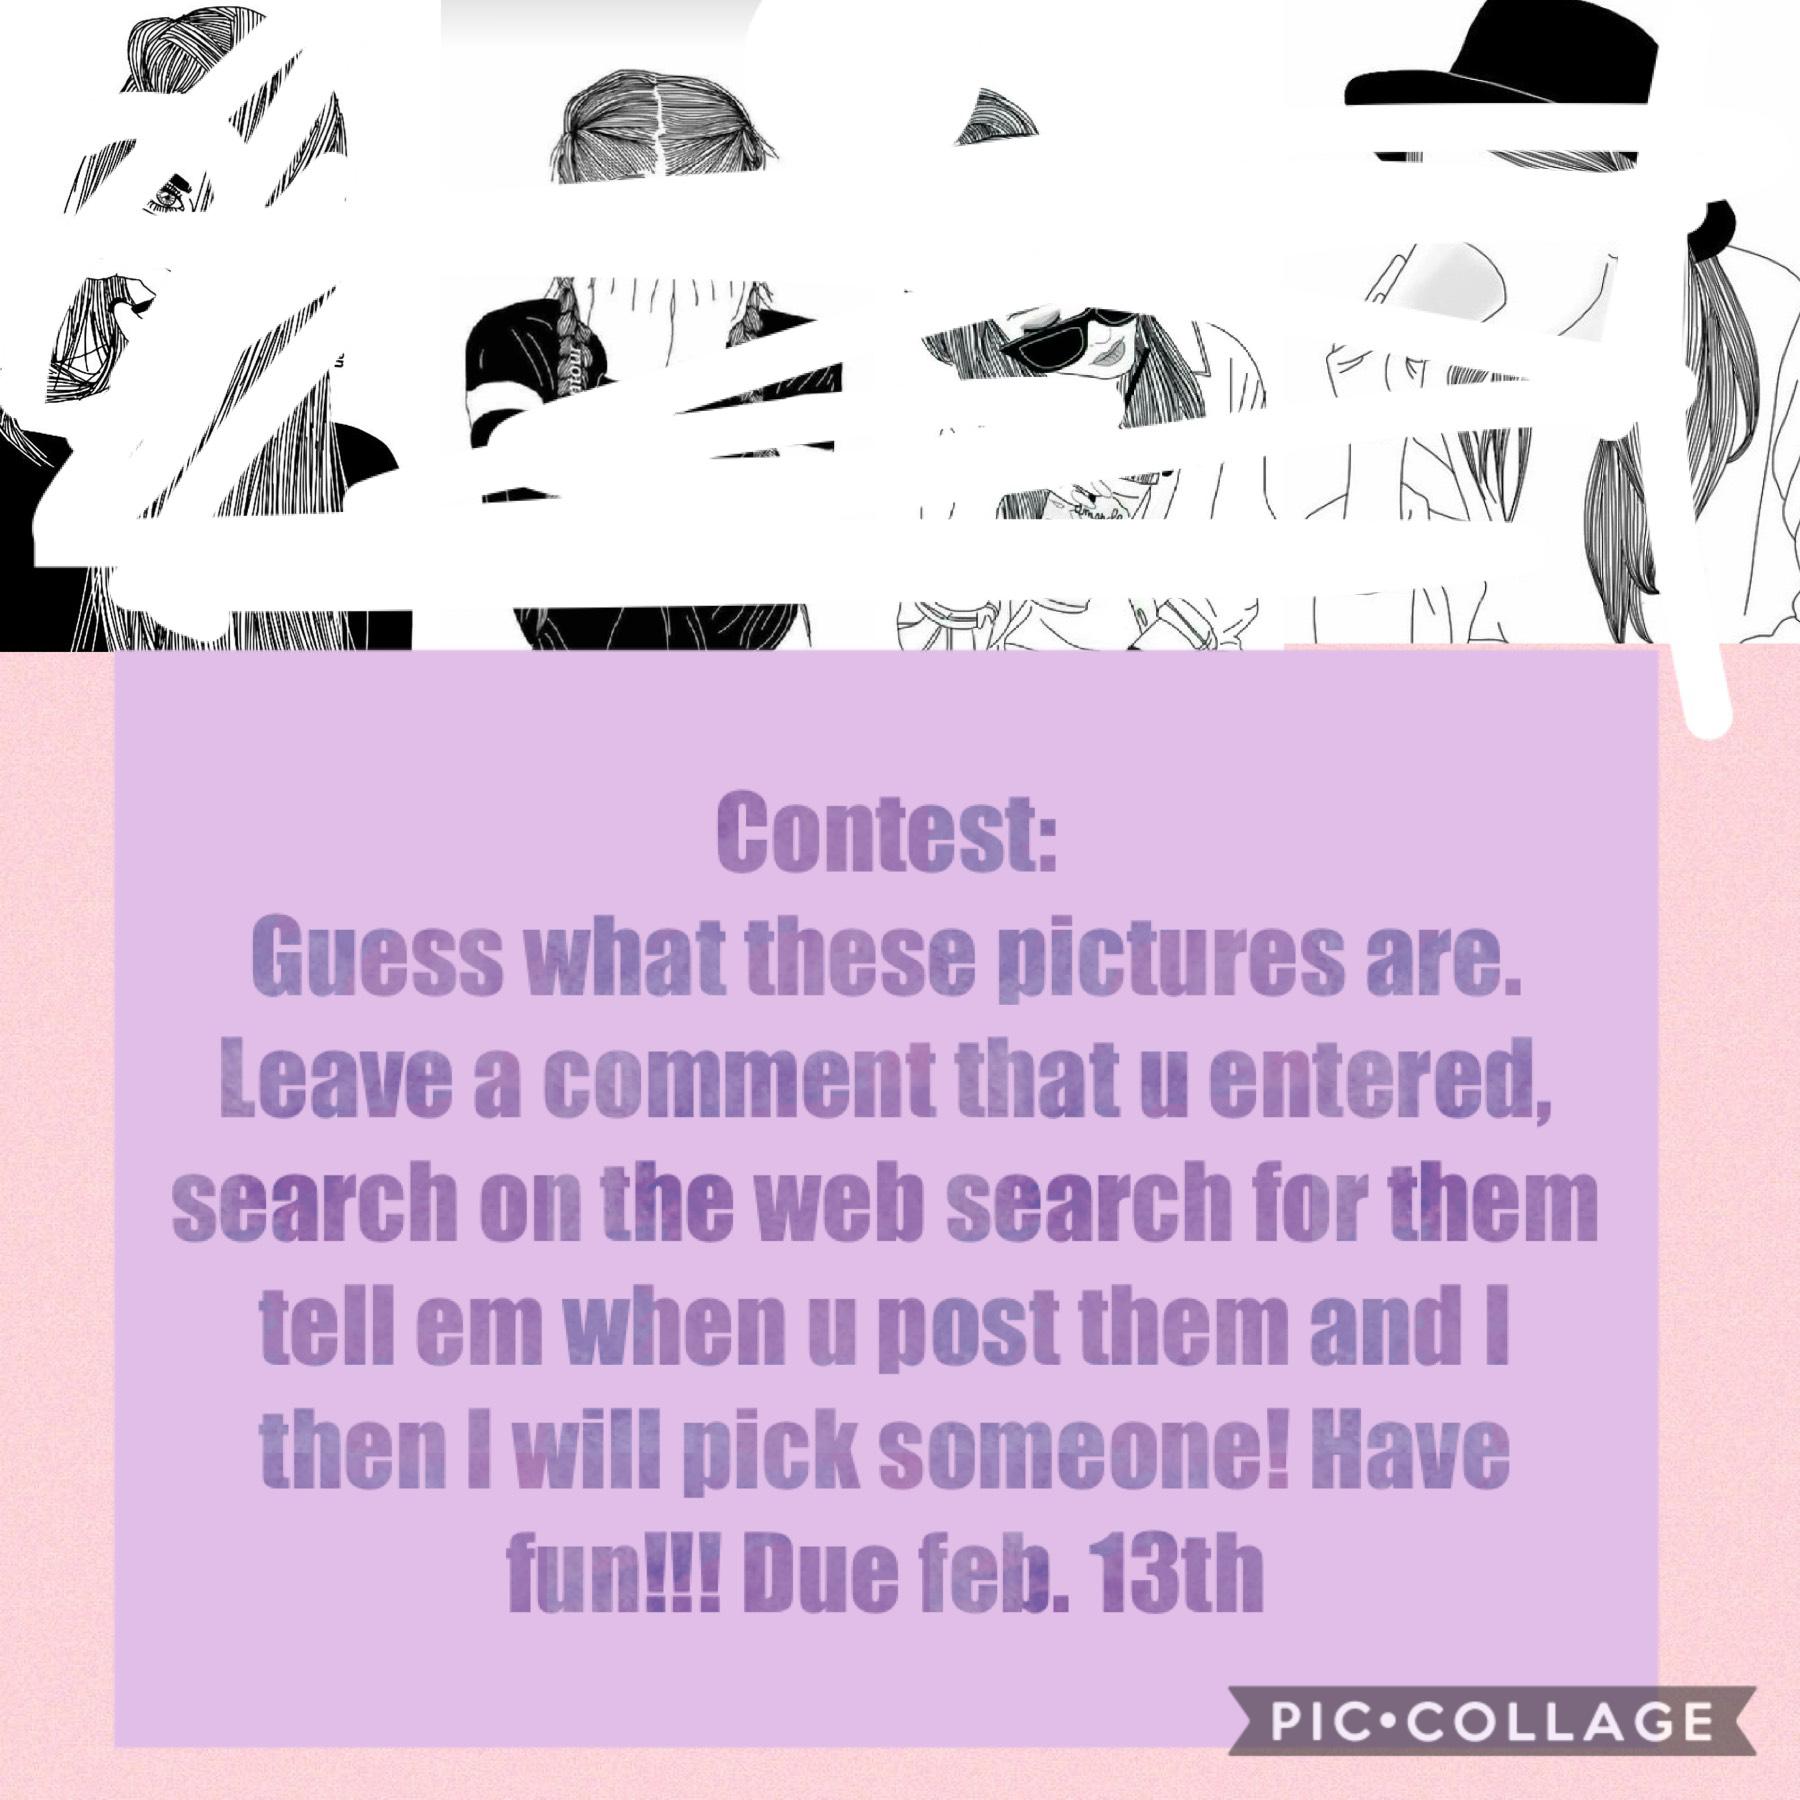 Contest (First one. Sorry if I did it wrong.)